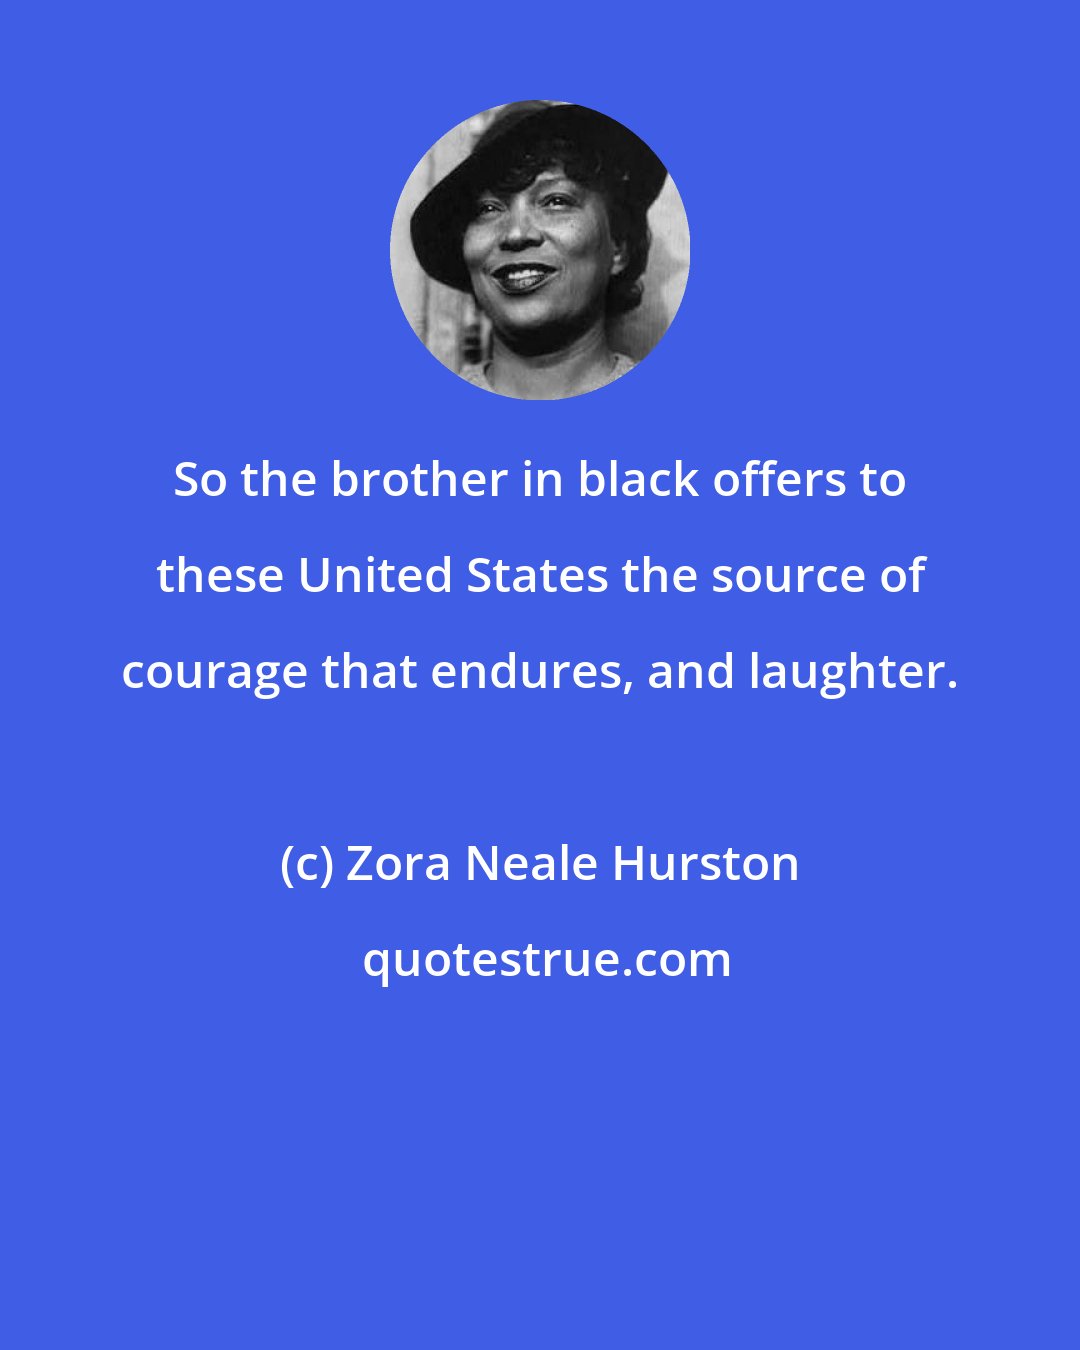 Zora Neale Hurston: So the brother in black offers to these United States the source of courage that endures, and laughter.